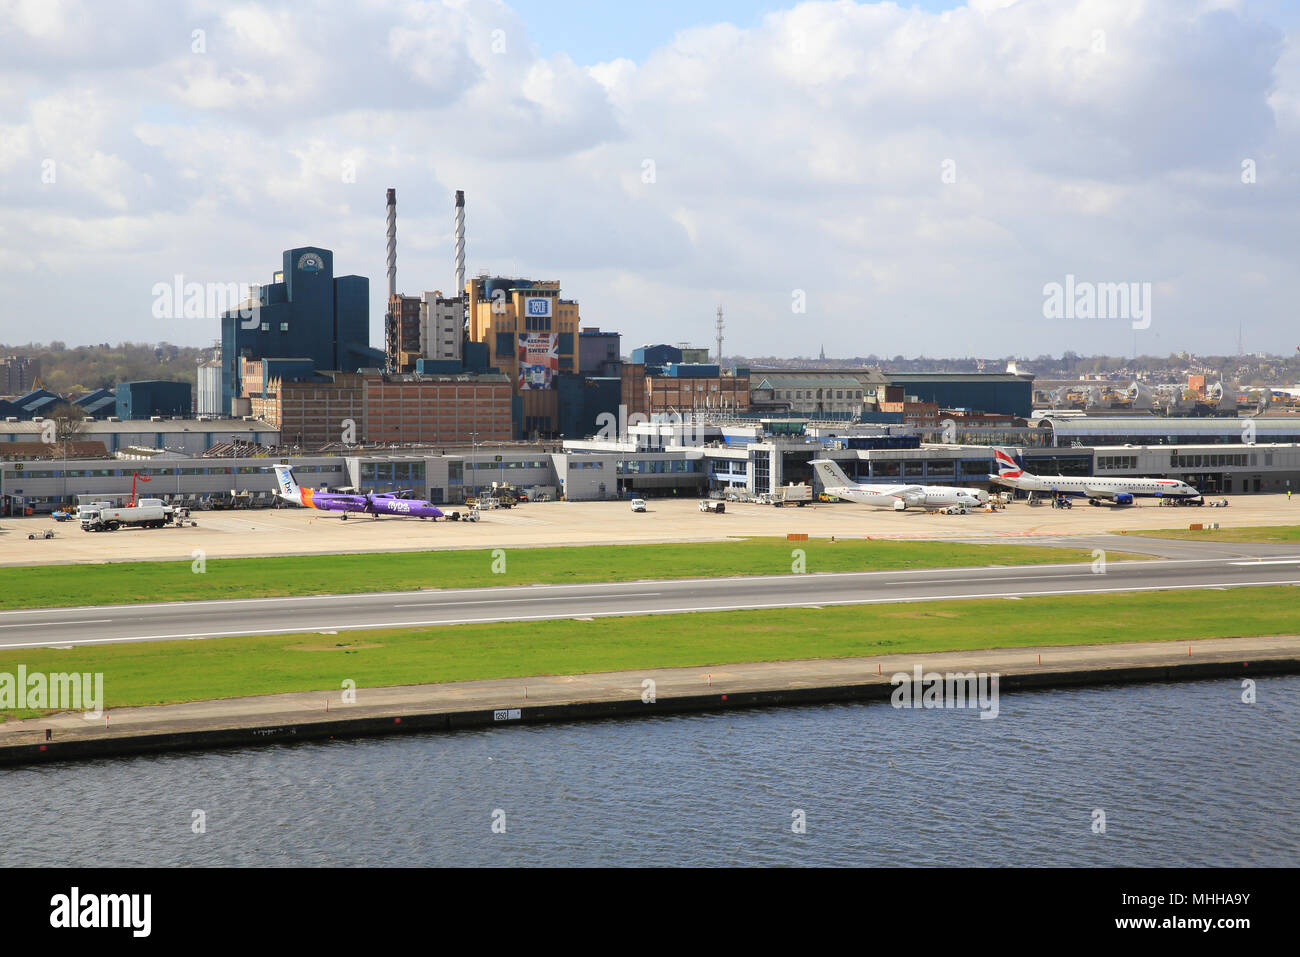 London City International Airport, in Royal Docks with the Tate & Lyle factory behind, in east London, England, UK Stock Photo